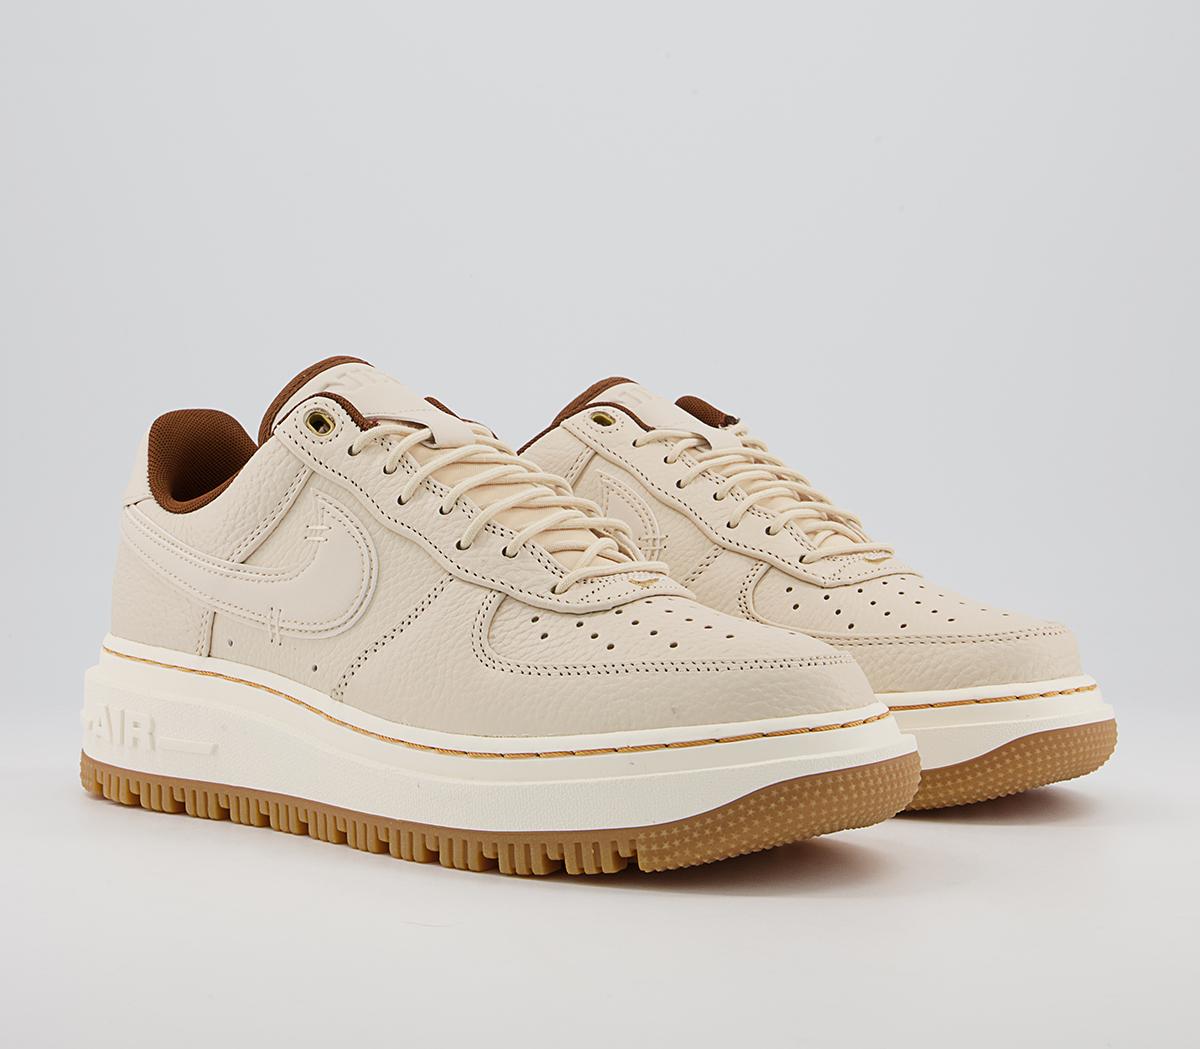 Nike Air Force 1 Luxe Trainers Pale White Pale Ivory Pecan Gum - Nike ...